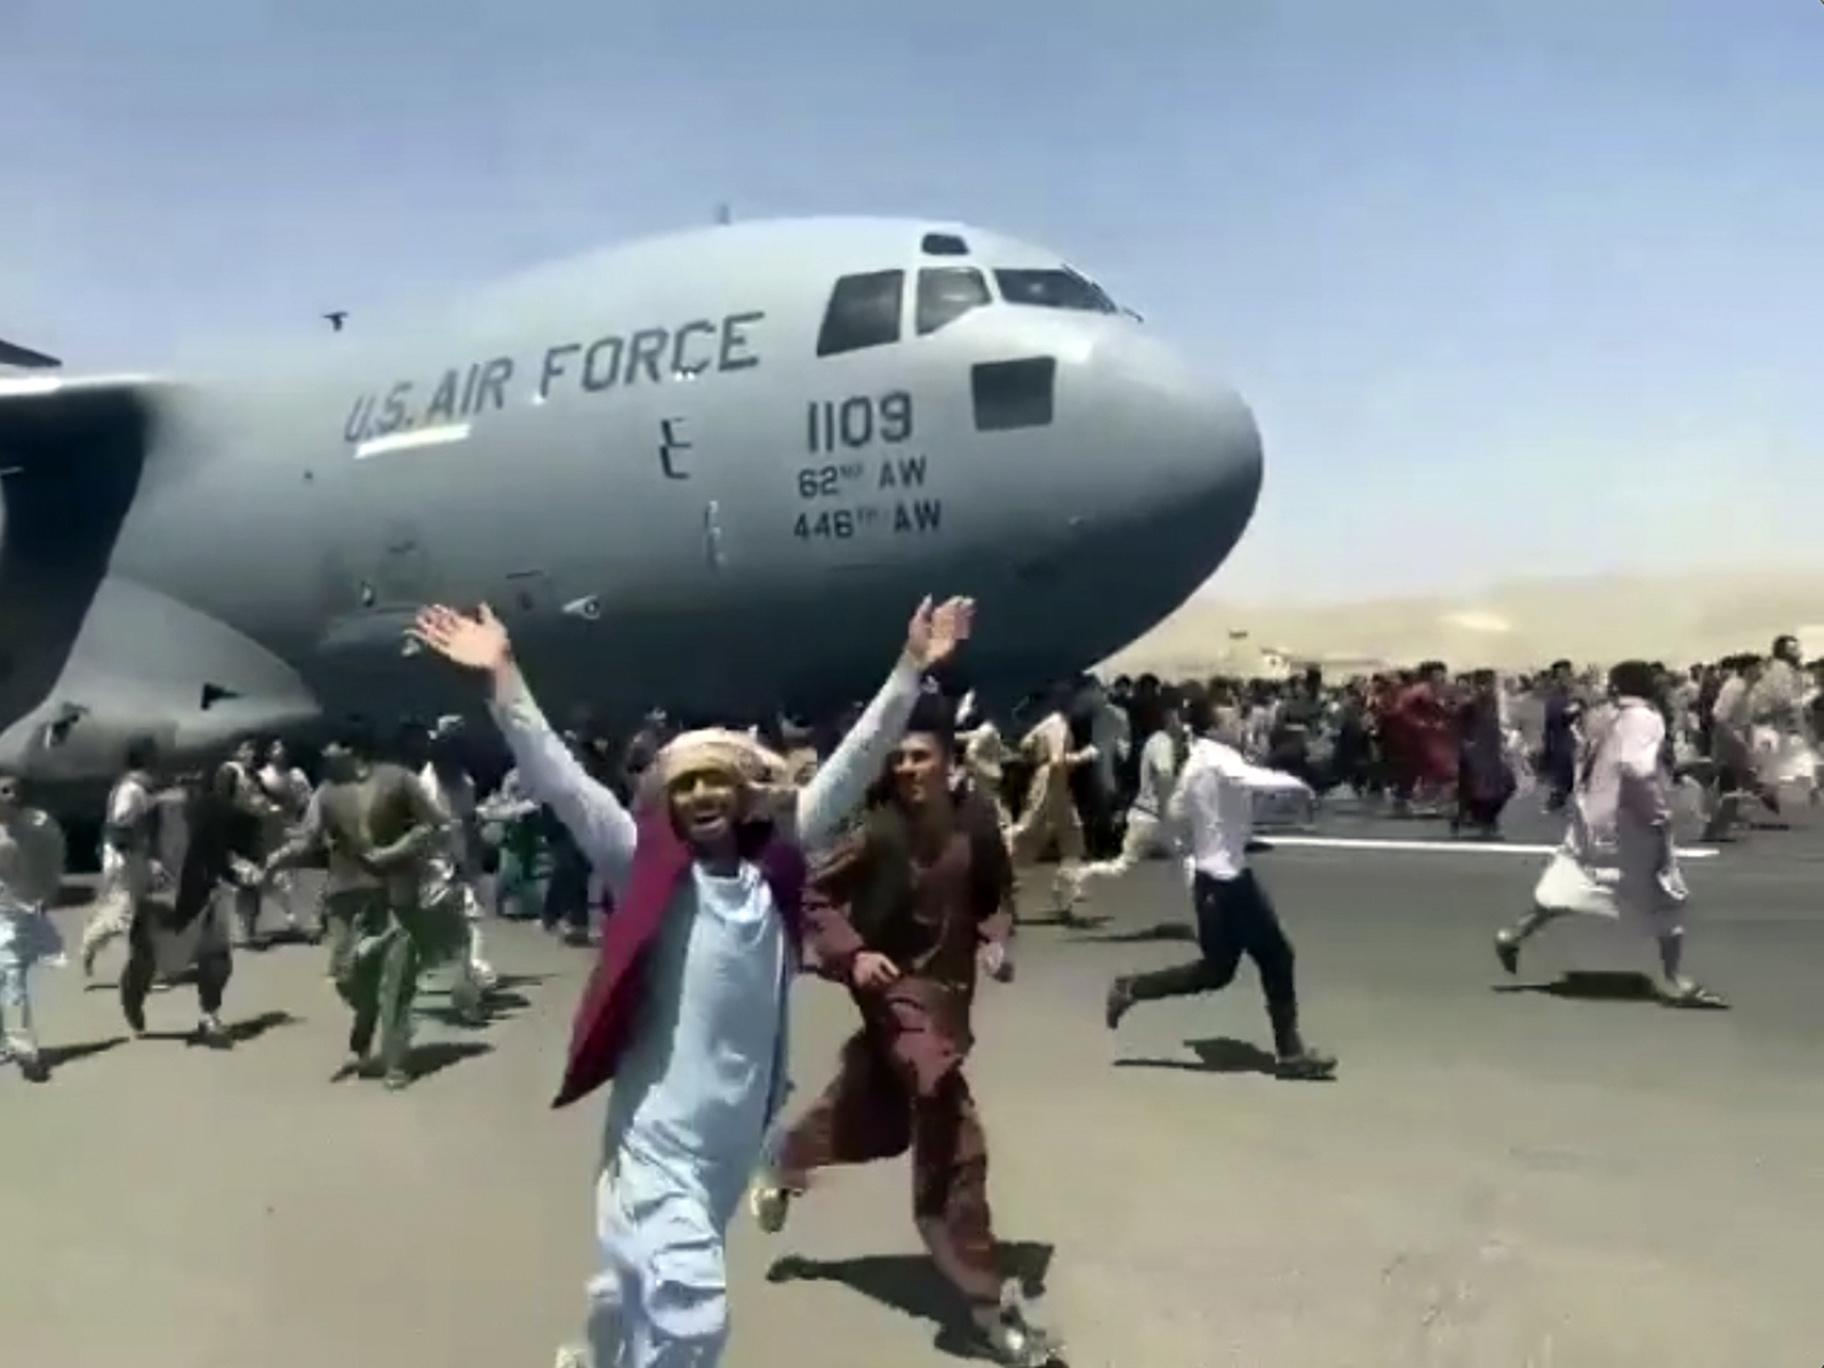 Hundreds of people run alongside a U.S. Air Force C-17 transport plane as it moves down a runway of the international airport, in Kabul, Afghanistan, Monday, Aug.16. 2021. (Verified UGC via AP)